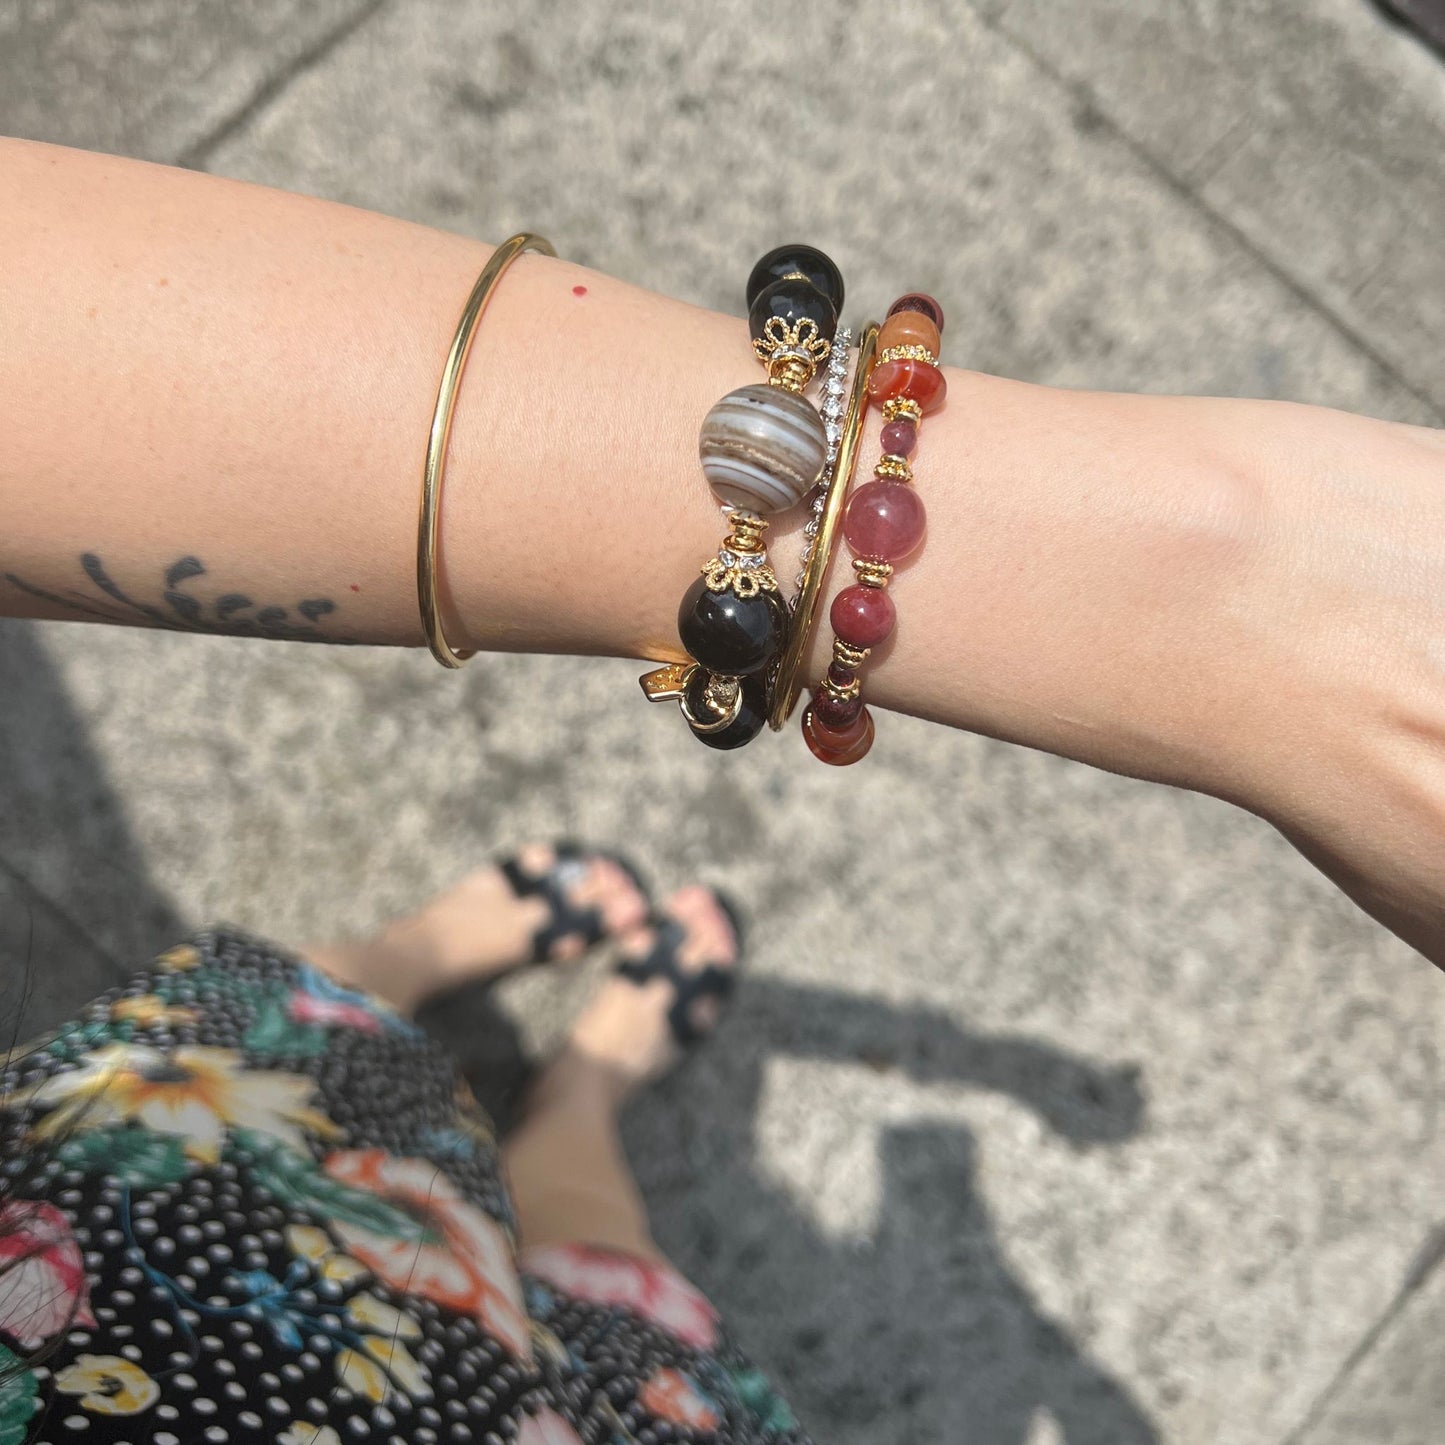 Looking For Peace, Calm & Clarity Bracelet